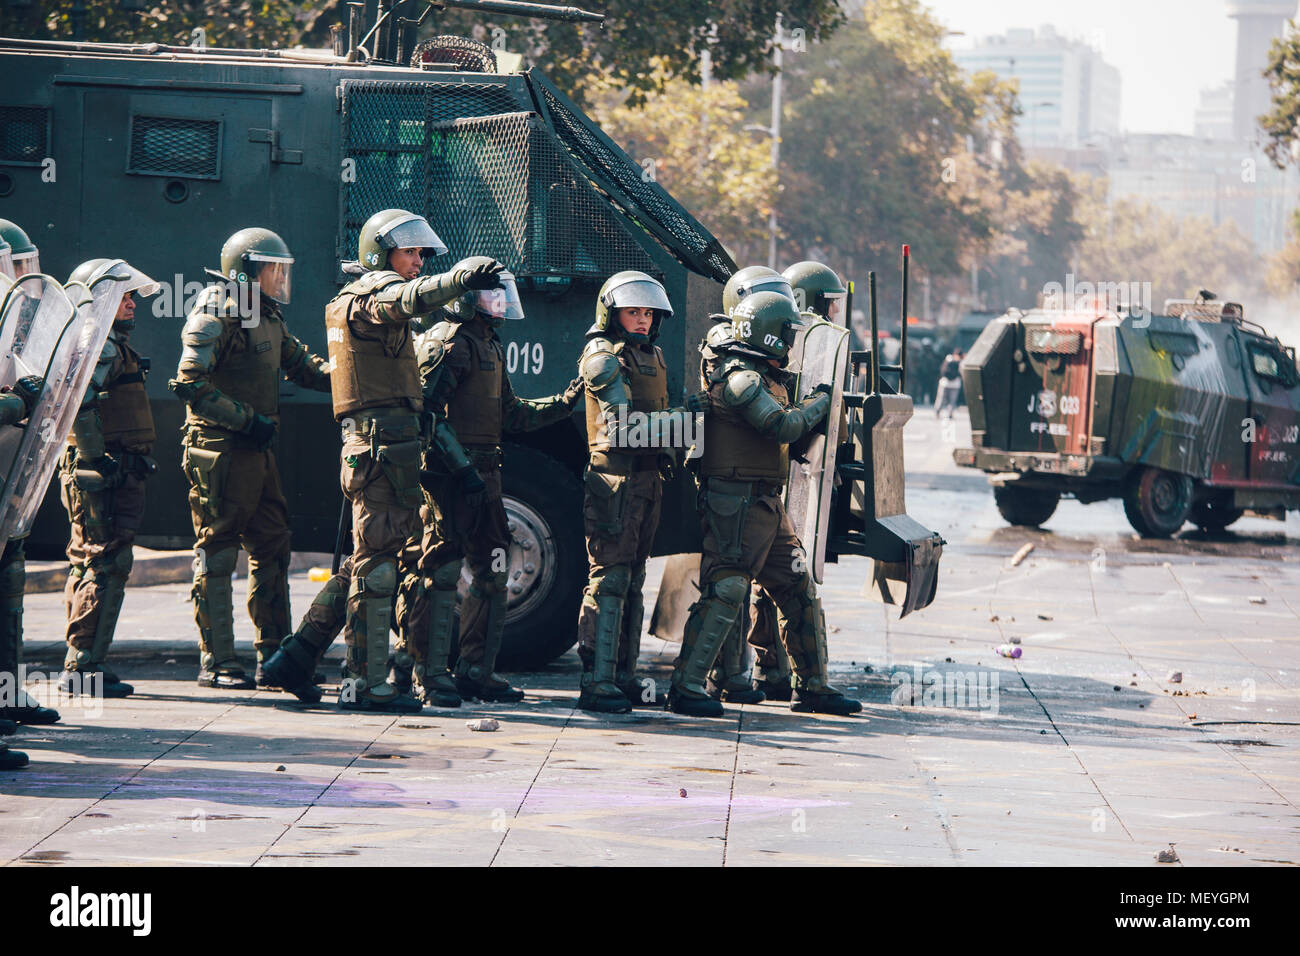 Santiago, Chile - April 19, 2018: Chilean riot Police disperse protesters during a demonstration demanding an end to the Profit in the Education. Stock Photo